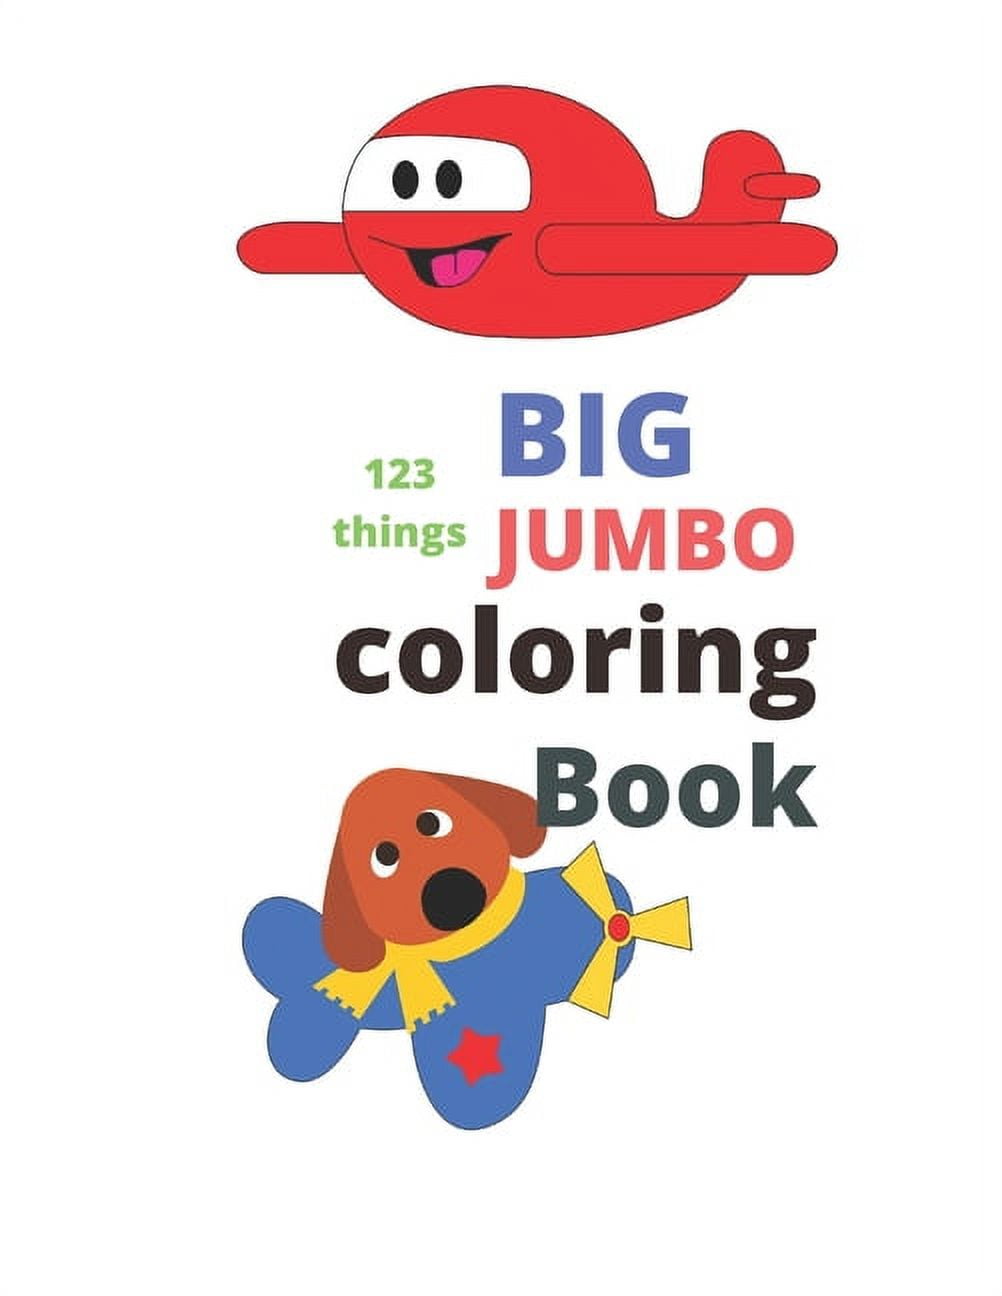 123 Things BIG JUMBO Coloring Book: Coloring Book, Big Easy, Toddler Early Learning, Jumbo Book Kids Age2-4 8.5x11 Inch 26 Pages [Book]